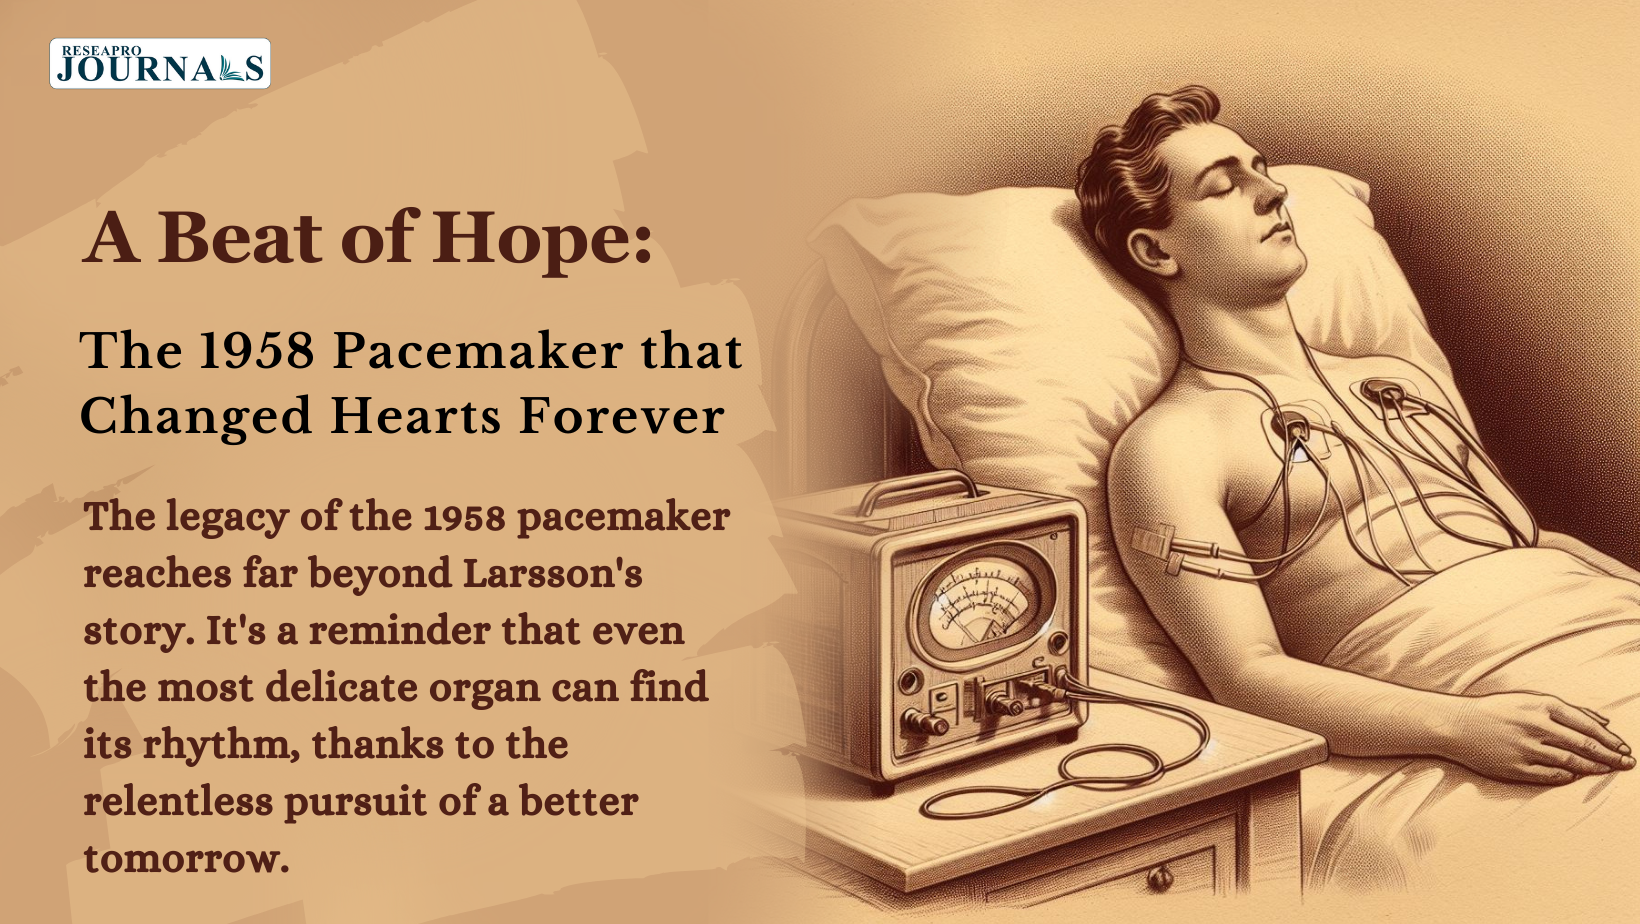 A Second Beat, A Second Chance: The Game-Changing Pacemaker That Rewrote Heart History!